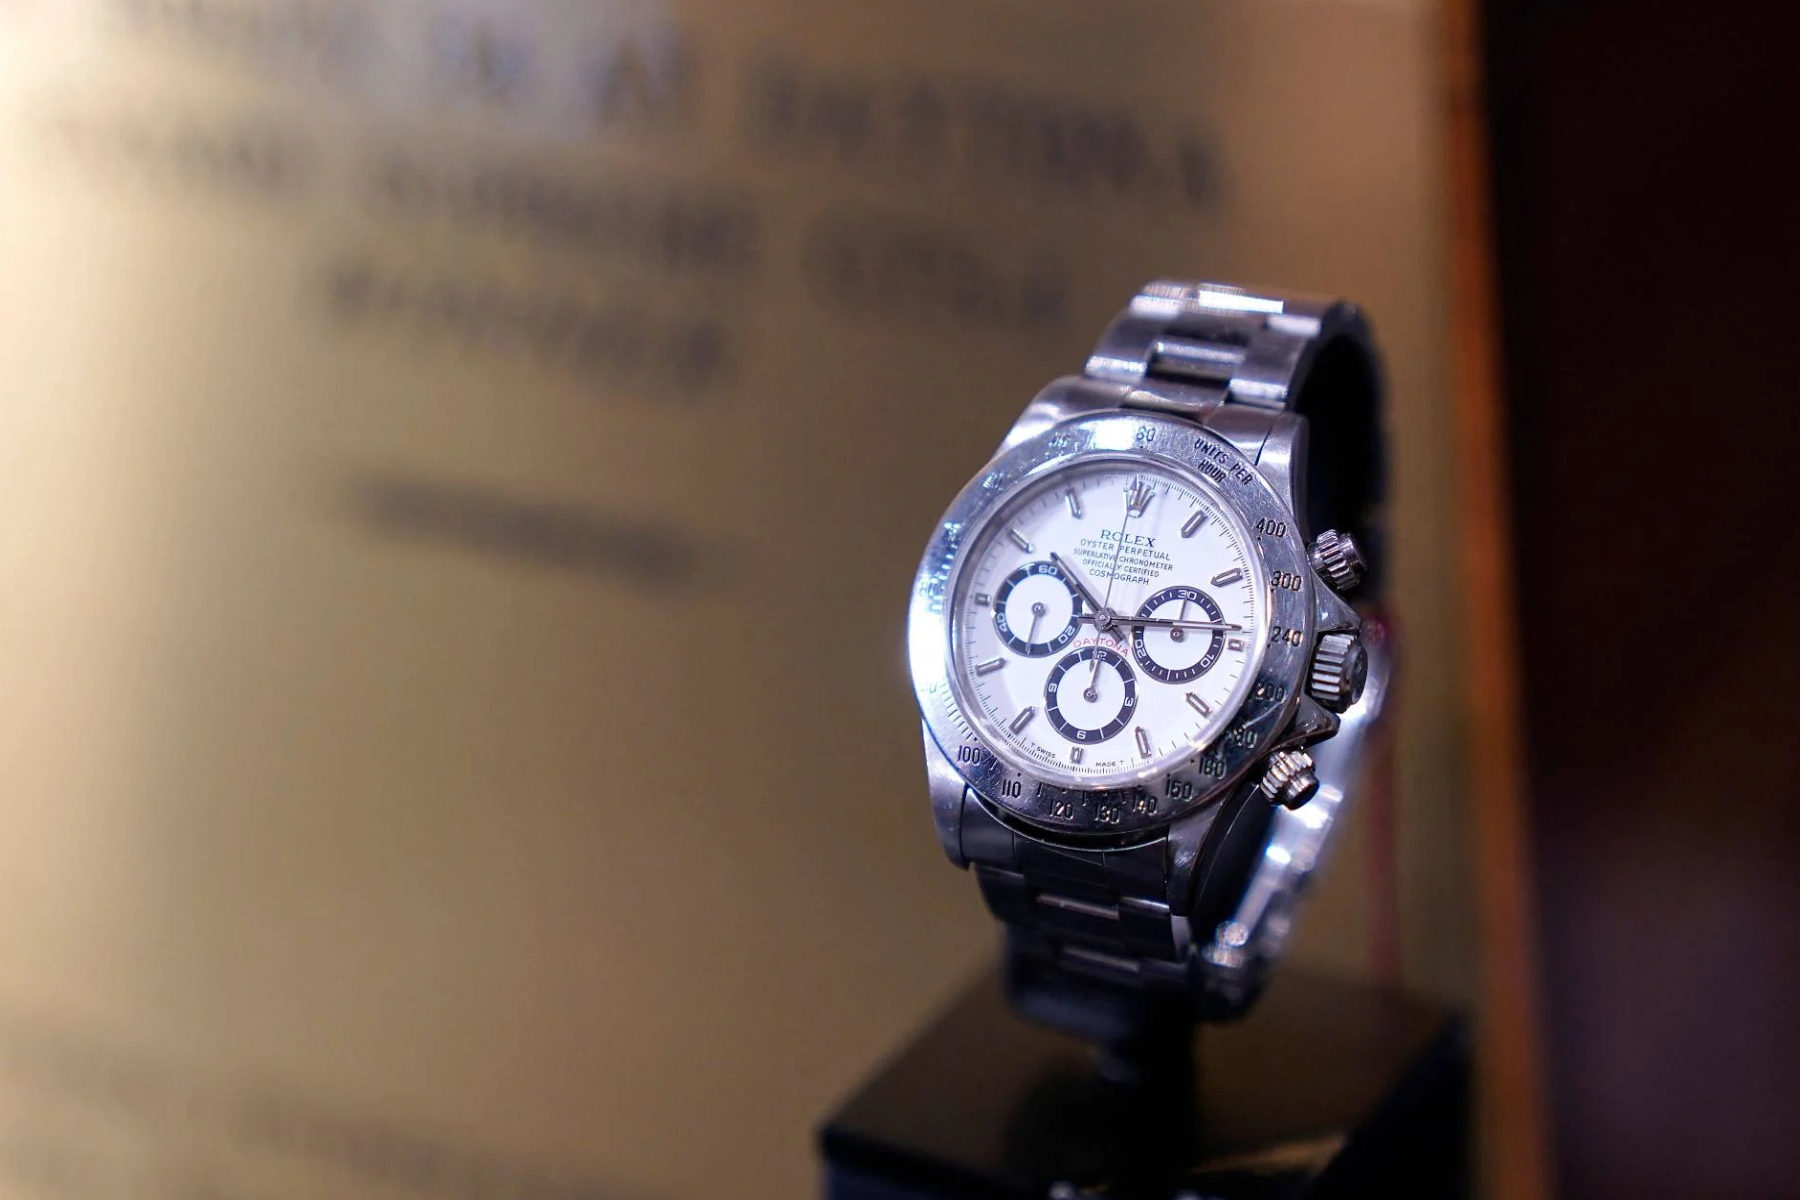 The 1993 Rolex reference 16520 Zenith Daytona, which was awarded to US film director Paul Newman in 1995 when he became the oldest person to win the 24 hours of the Daytona Race, is displayed during Sotheby’s Luxury Week 2023 press preview in New York City on June 1